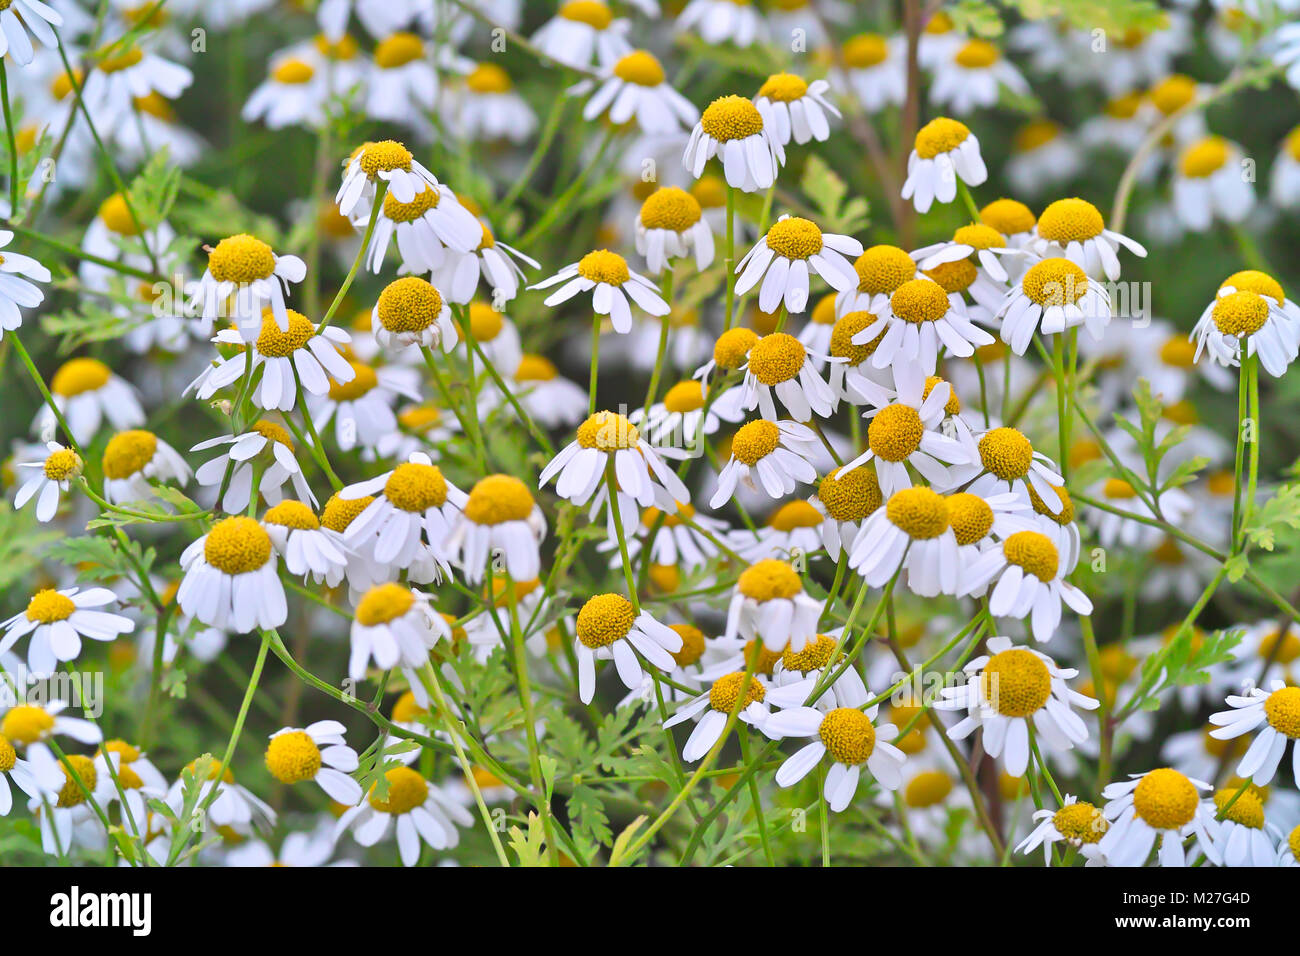 Many flowers of the medicinal herb feverfew in a bed Stock Photo